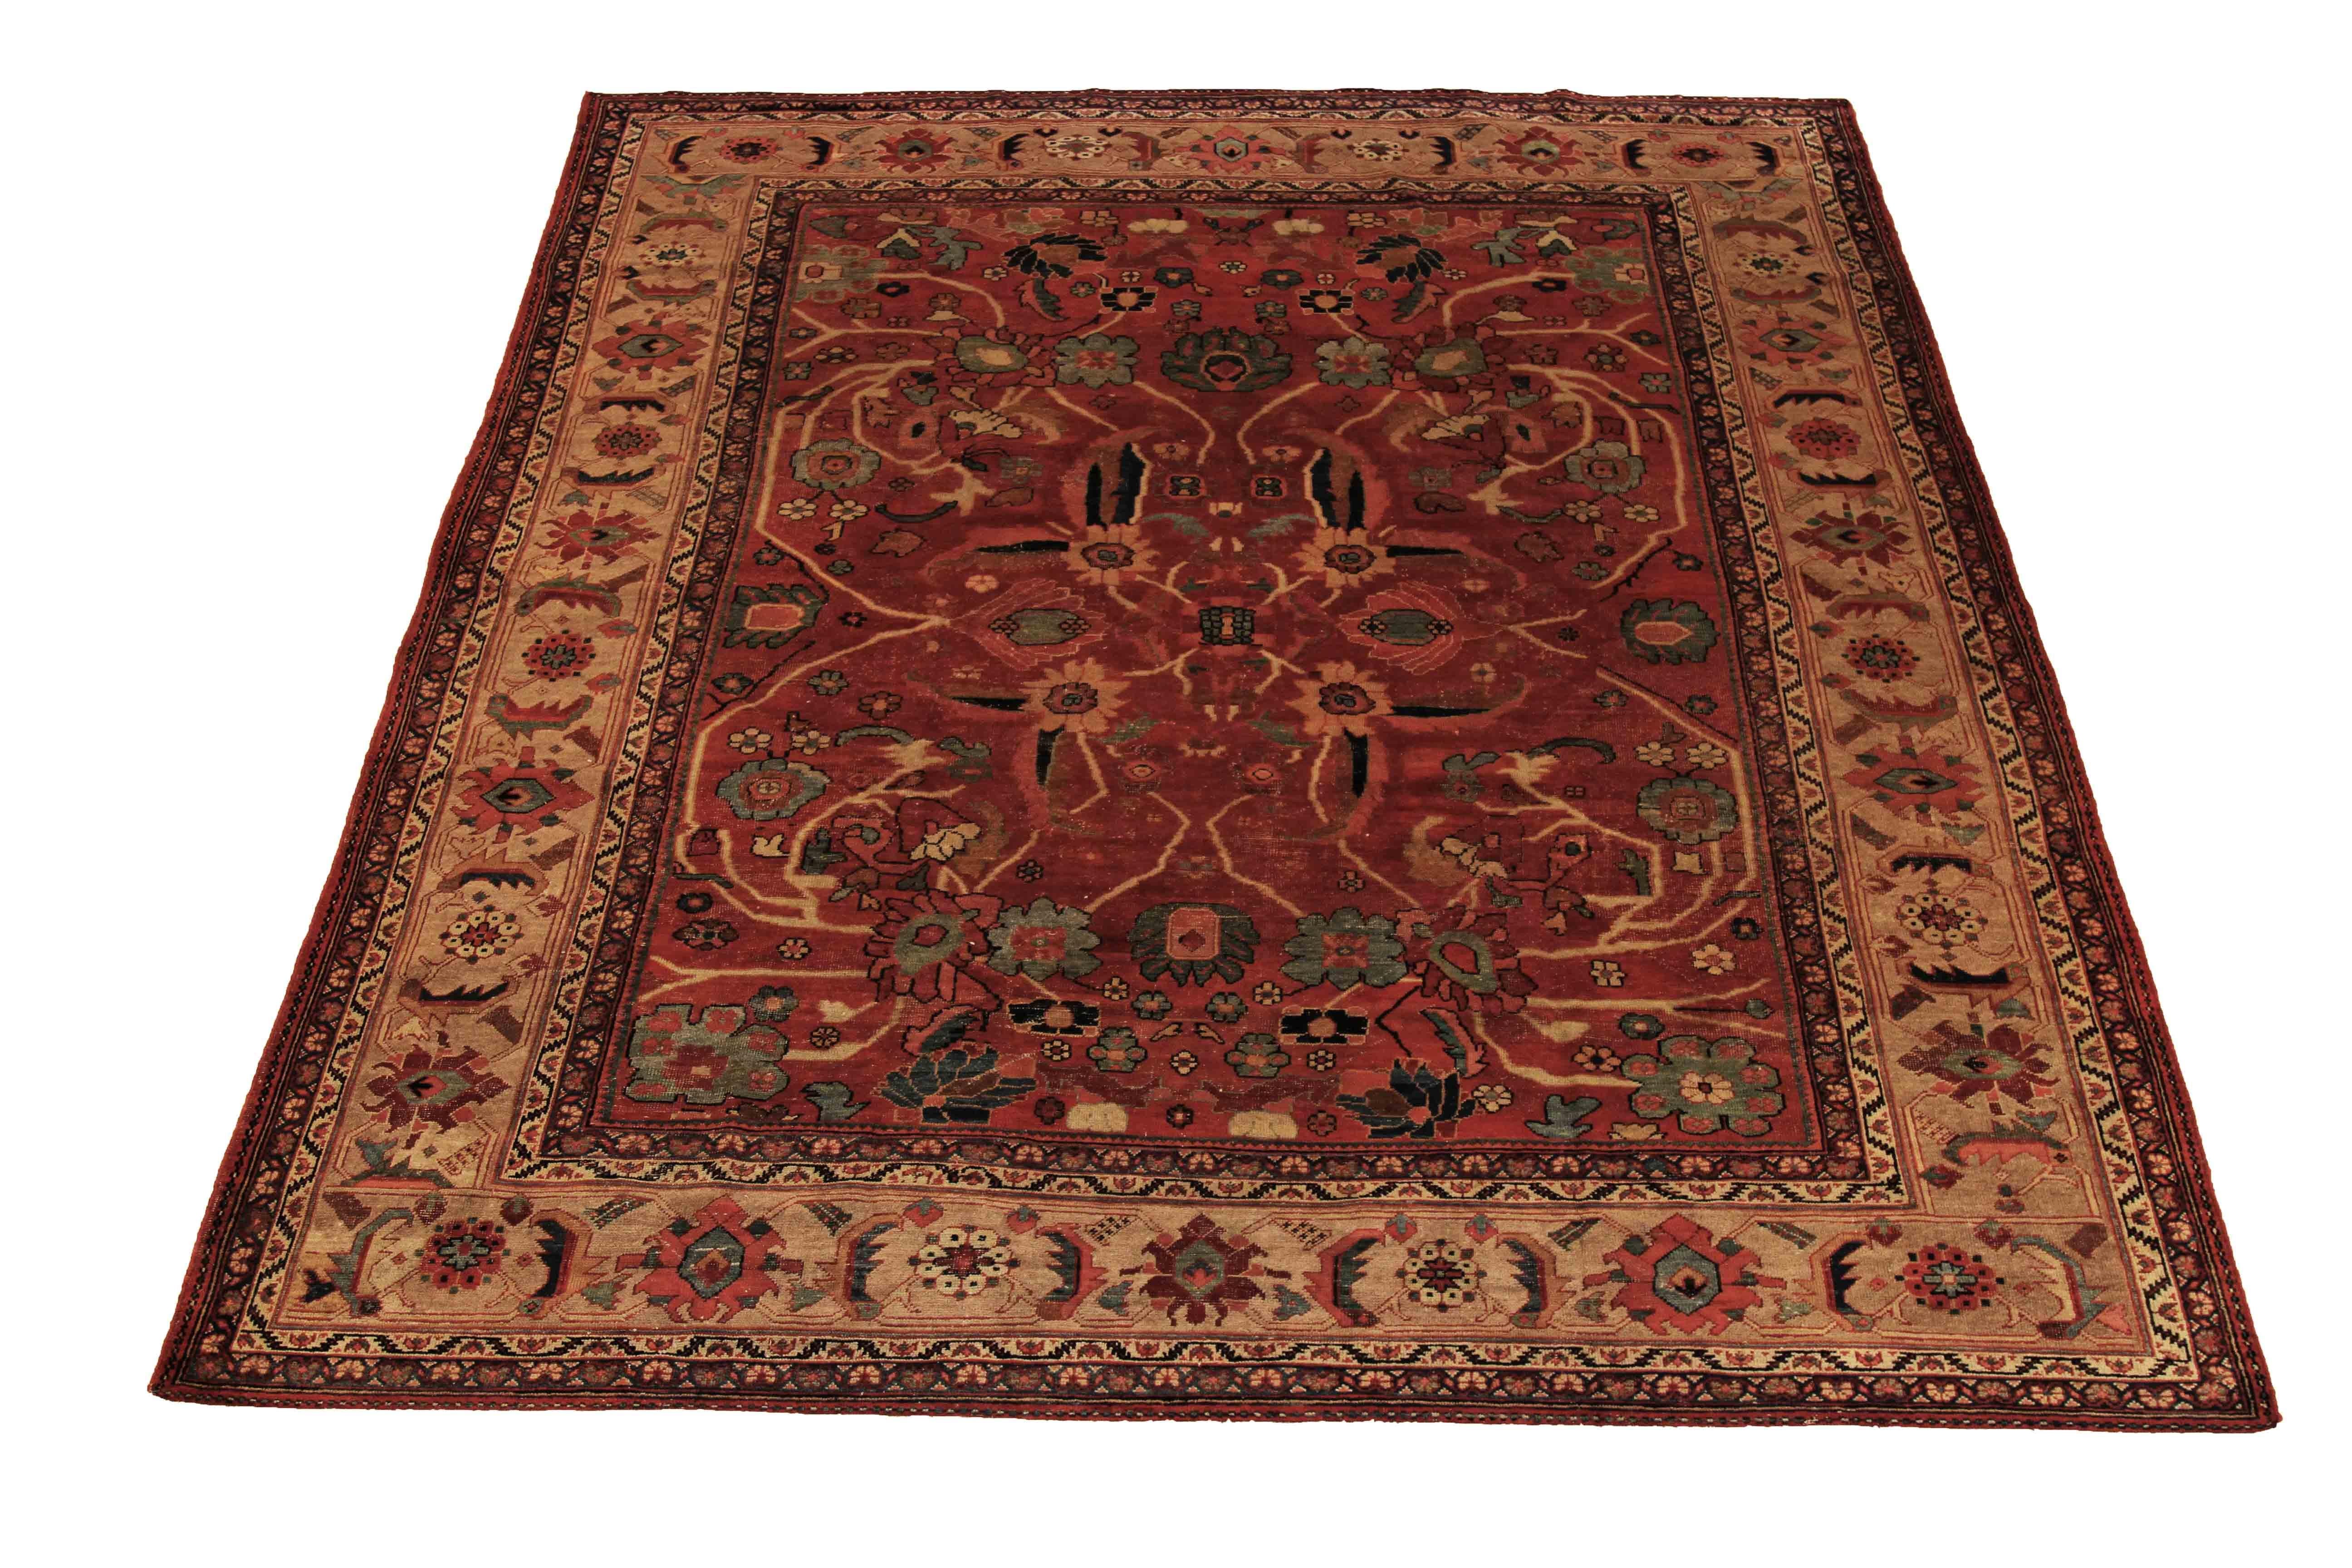 1940s Oversized Antique Sultanabad Persian Rug with Red and Black Floral Motif In Excellent Condition For Sale In Dallas, TX